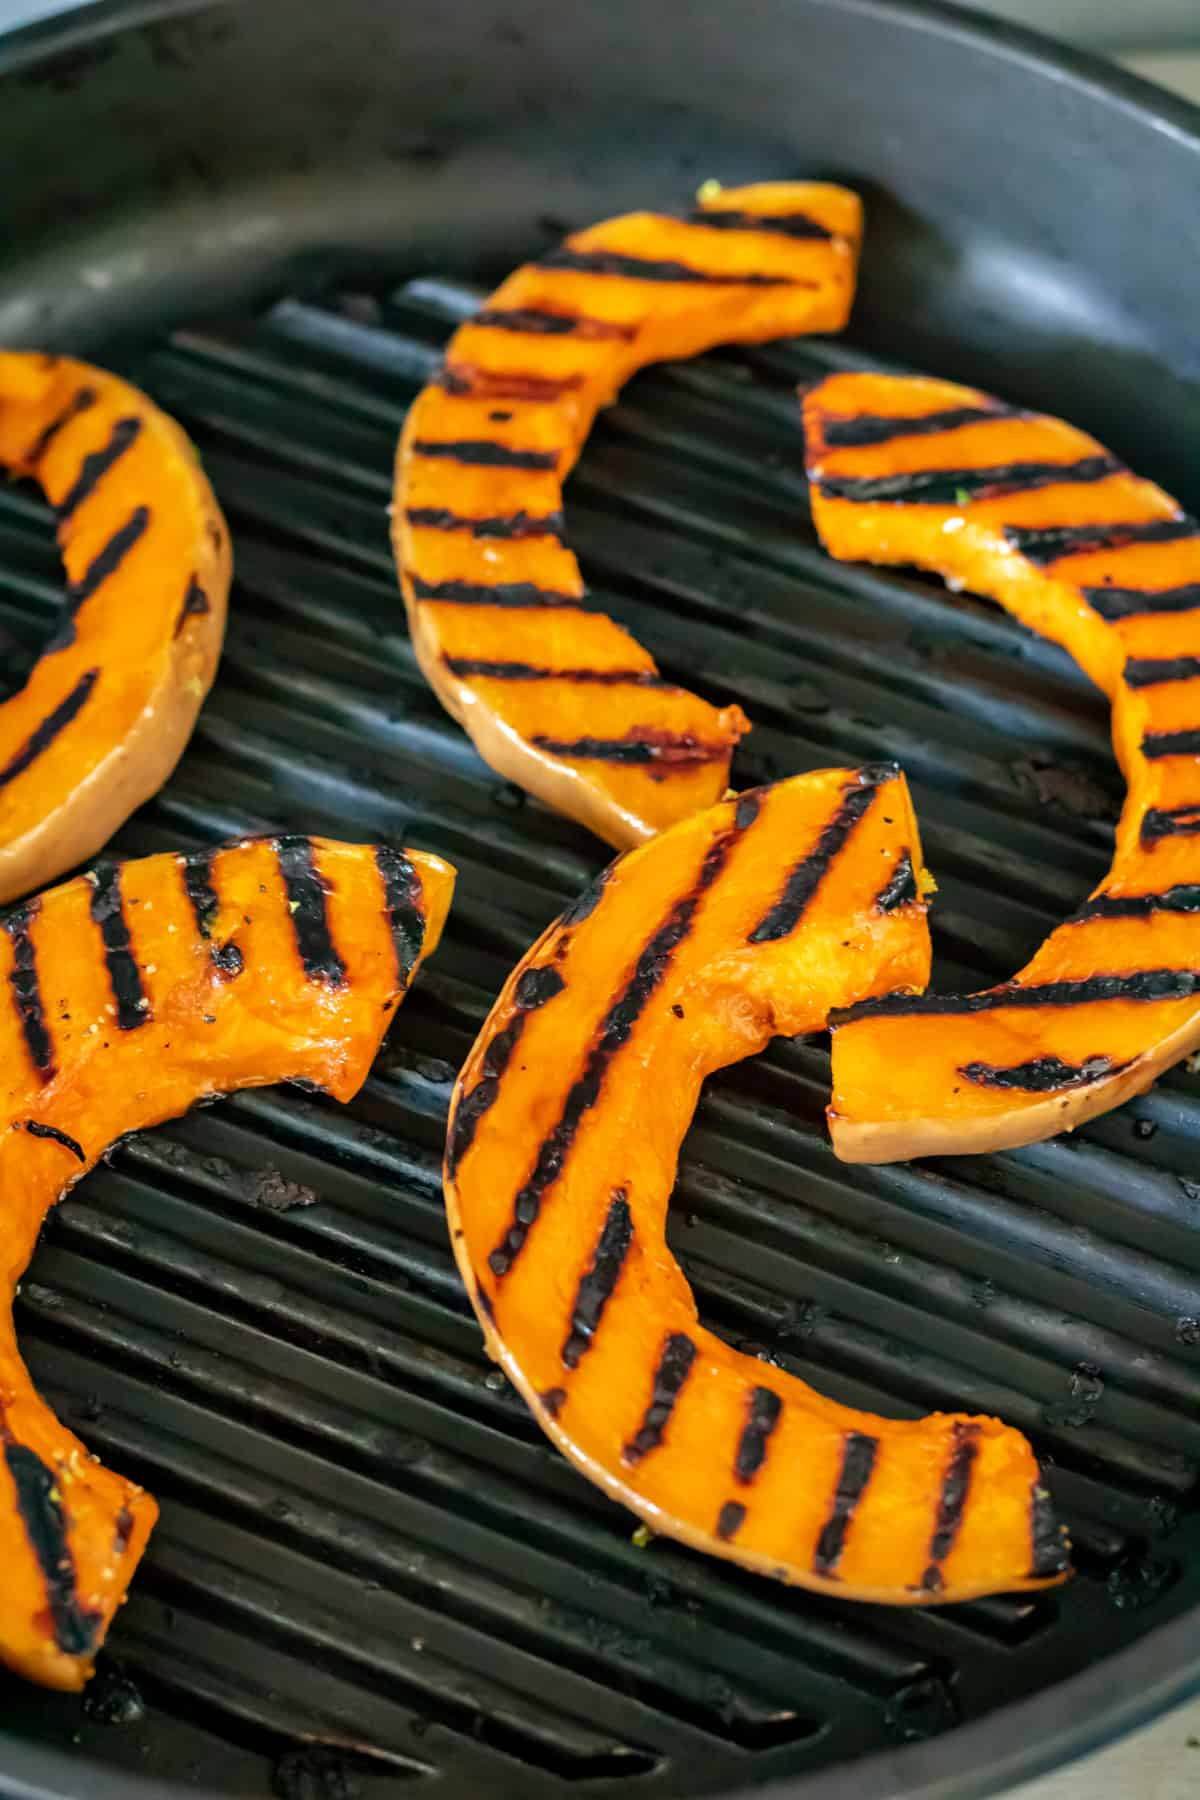 Slices of squash being grilled.